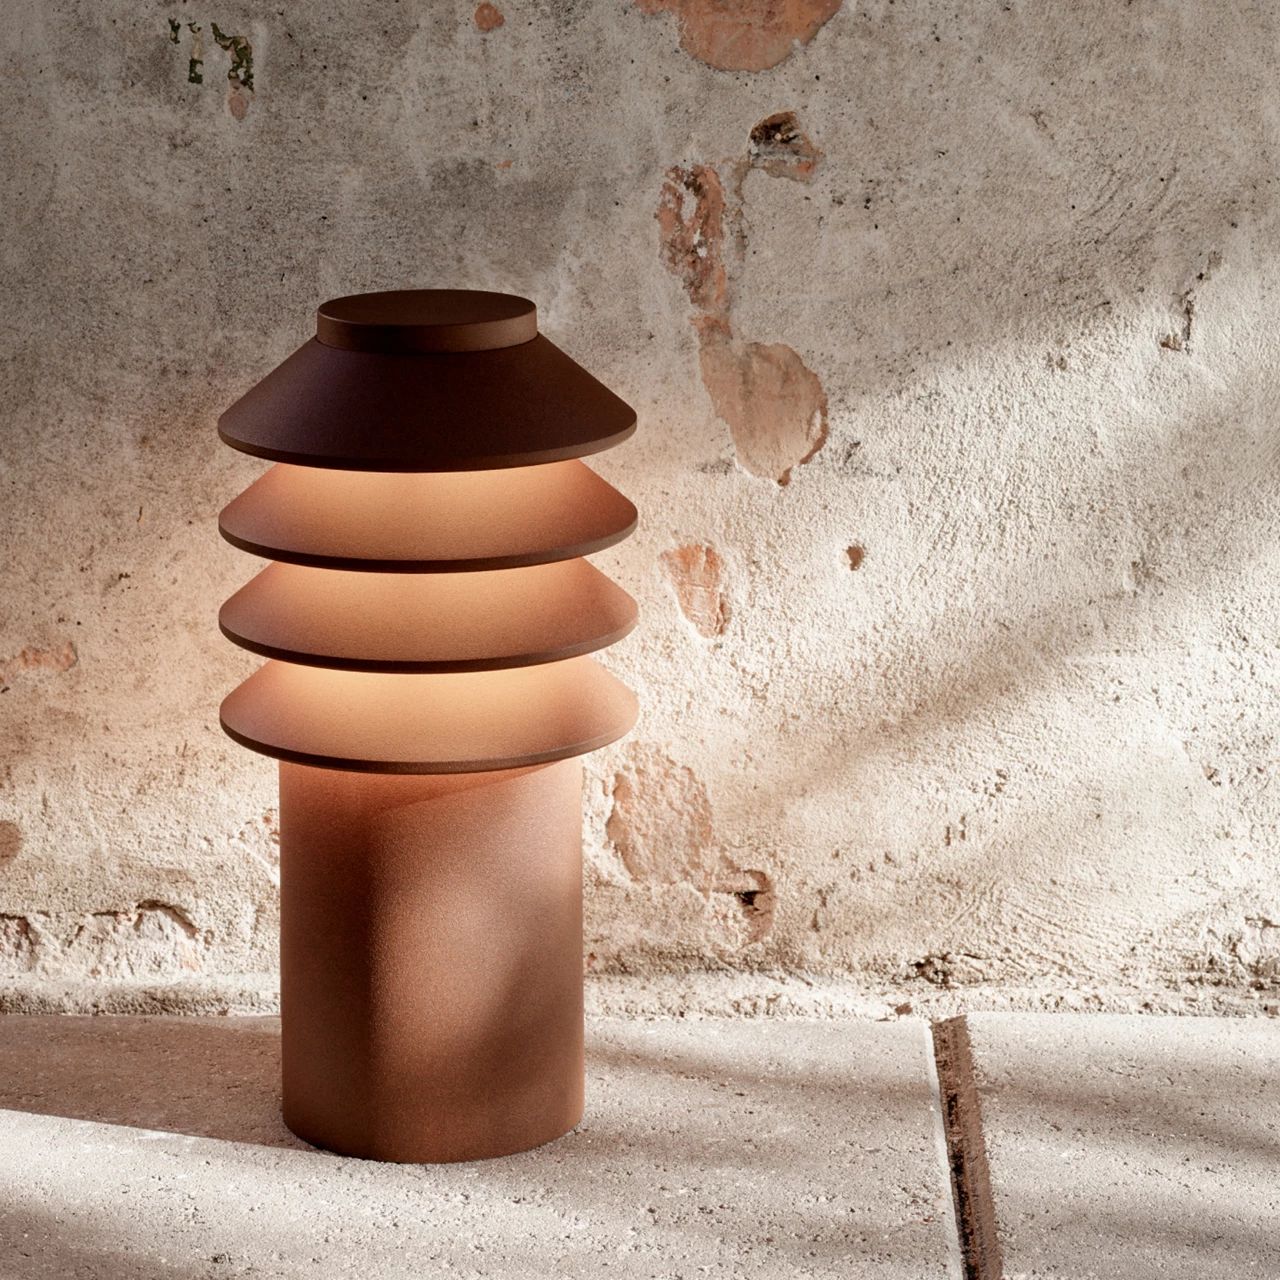 Louis Poulsen Bysted Garden Bollard Led 2700 K 14 W Spike Without Adaptor With Connector Long, Corten